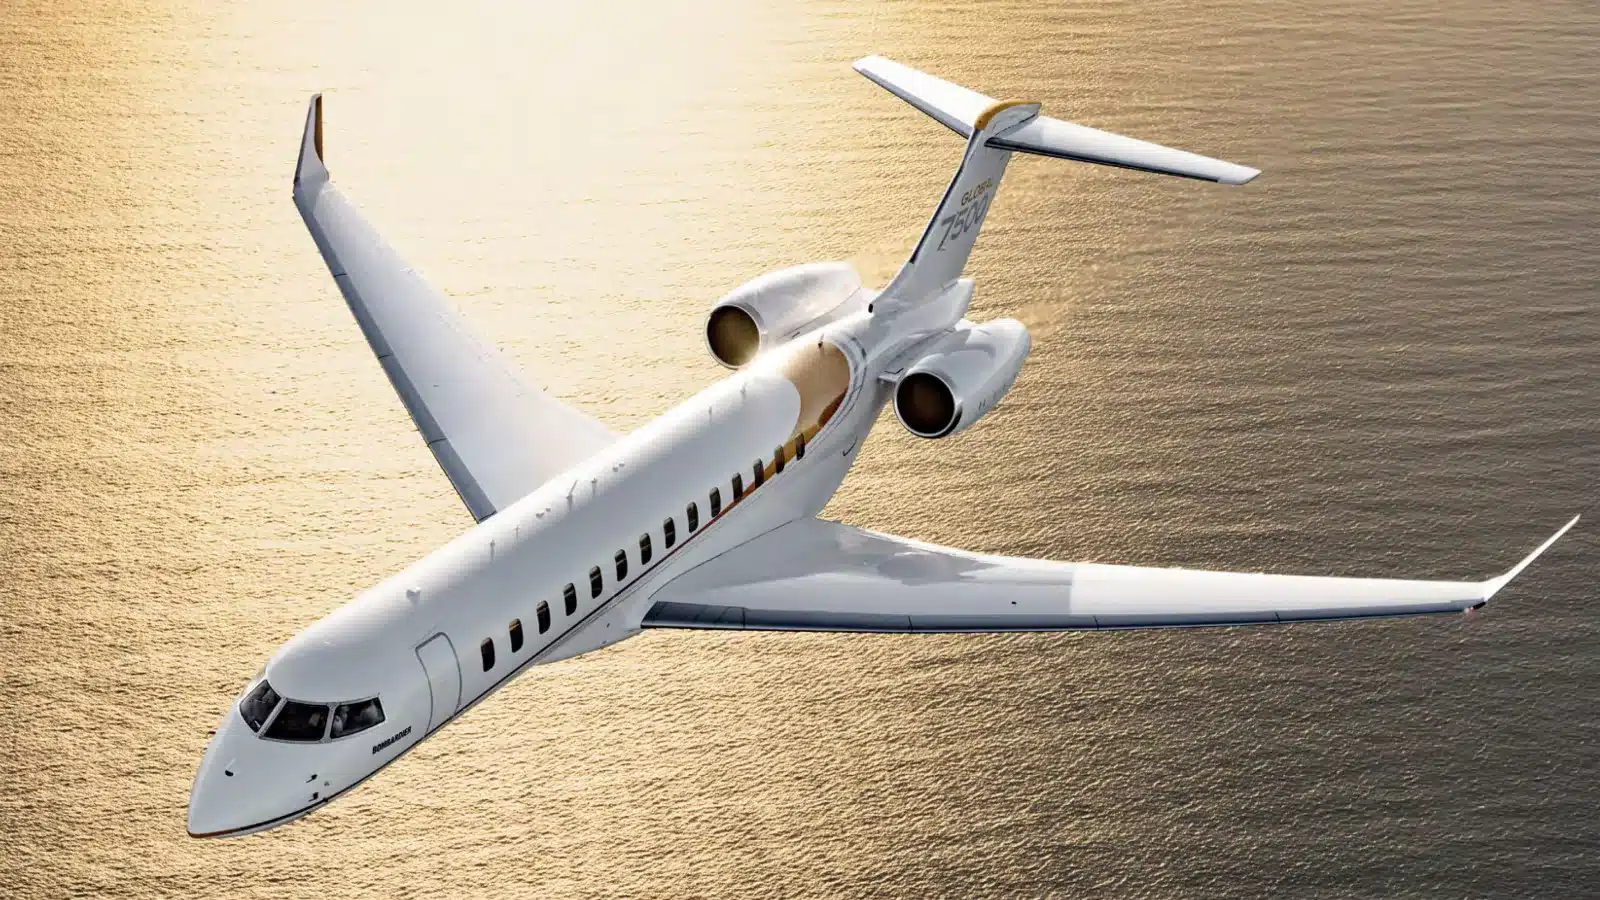 A Bombardier Global 7500 in flight over the ocean.